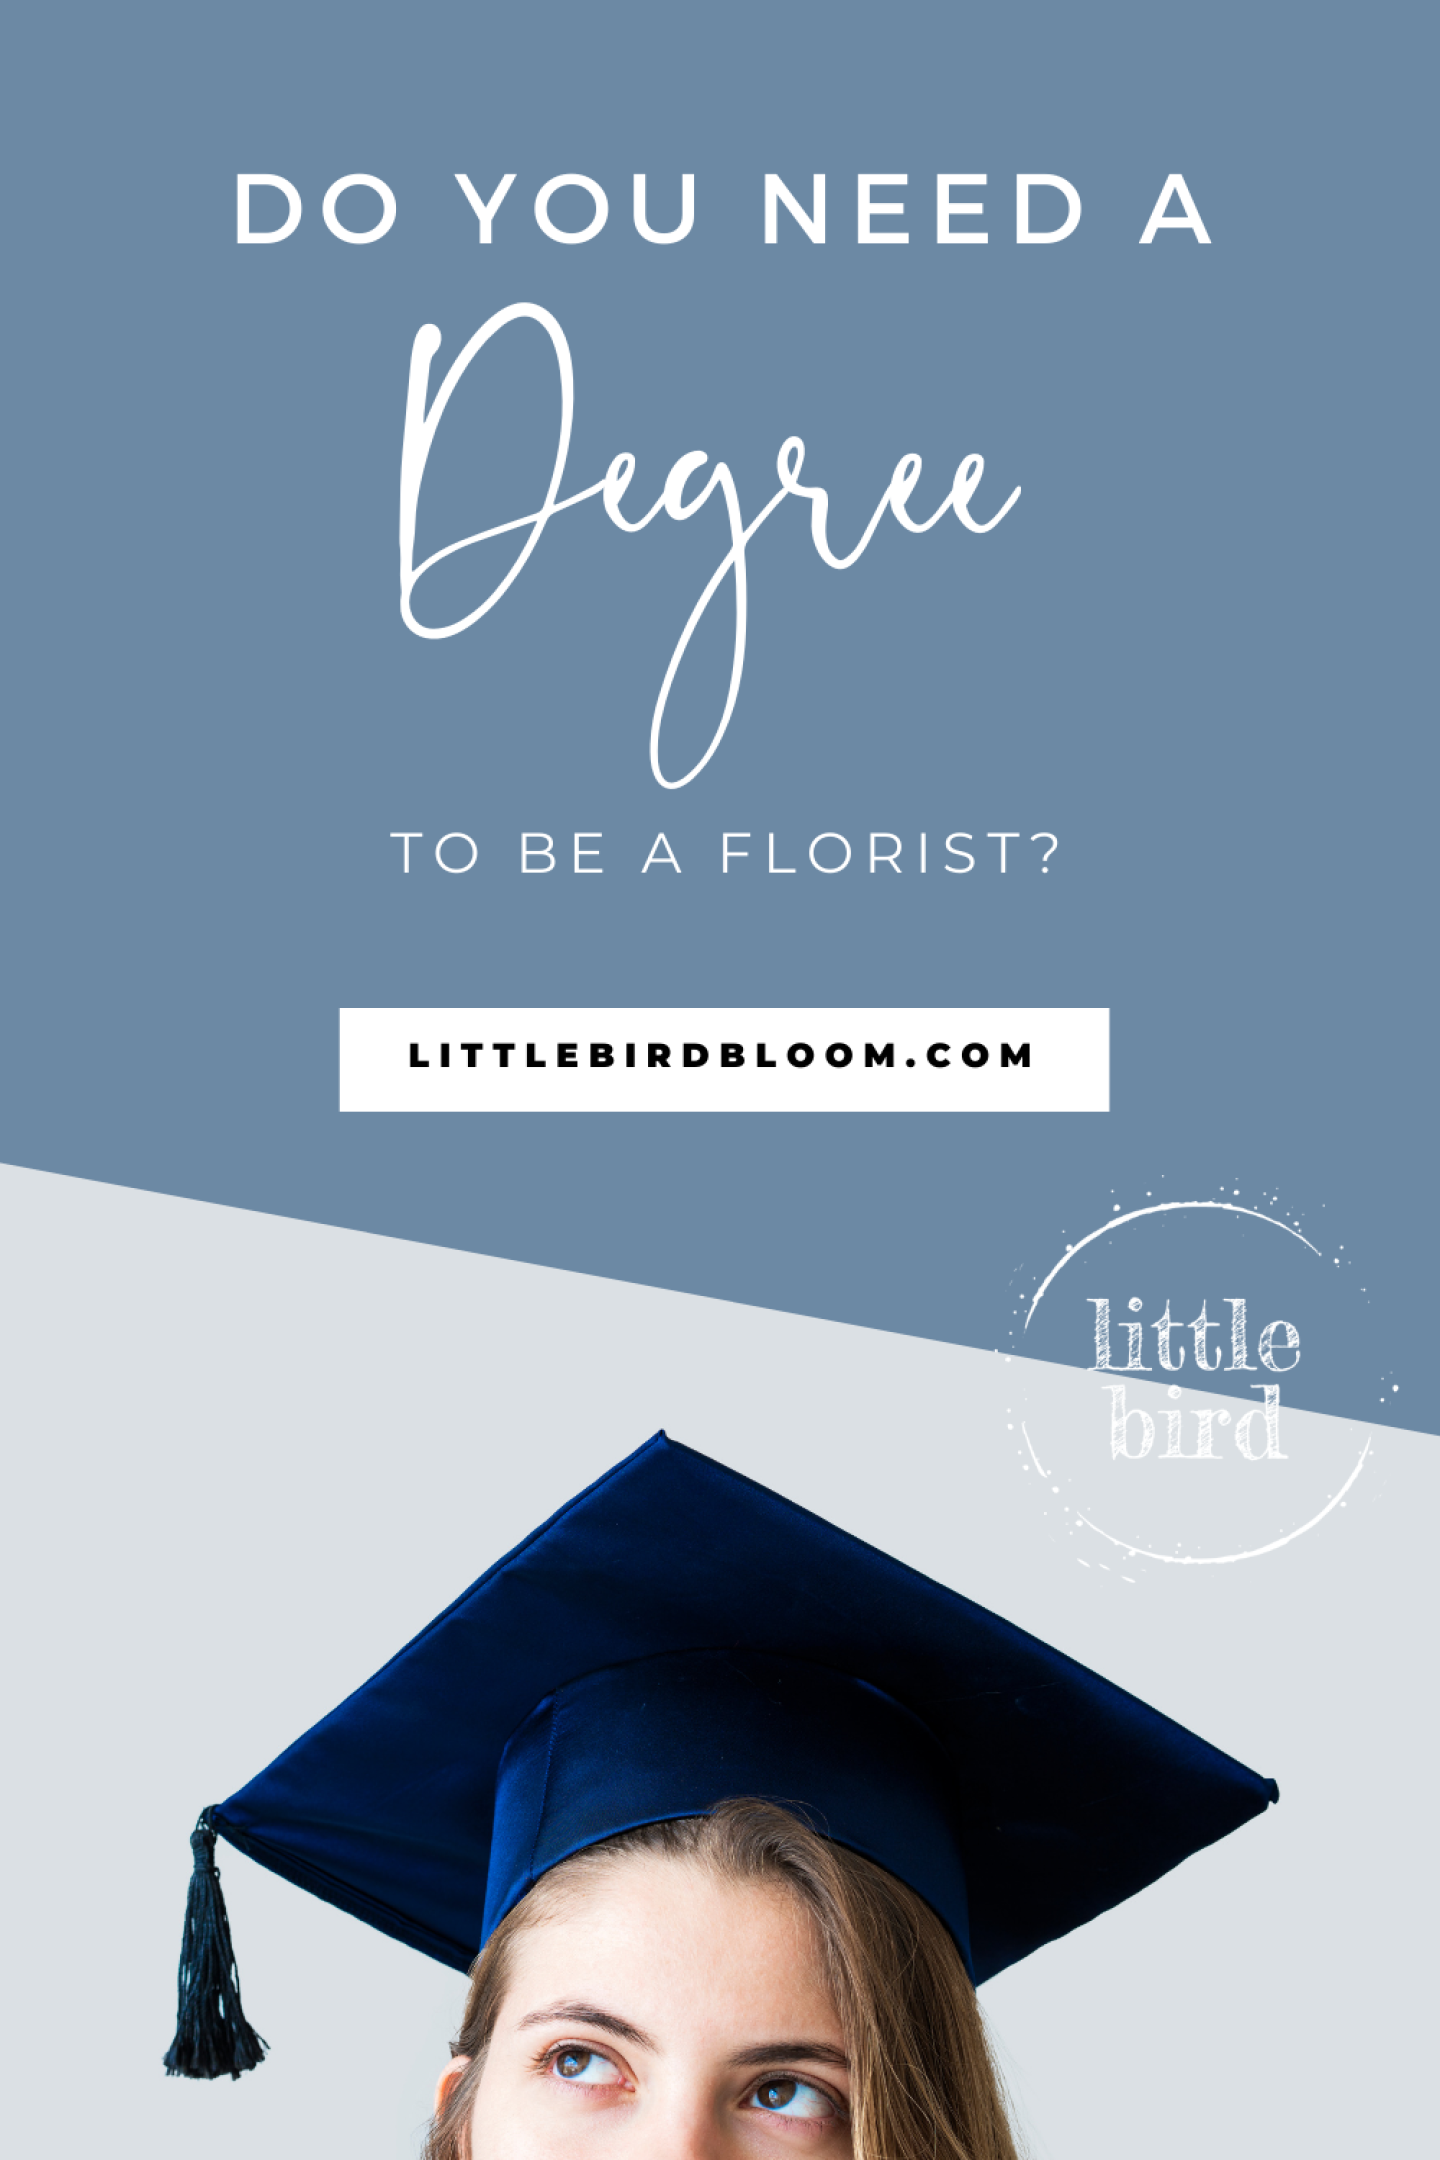 Do you need a degree to be a florist?